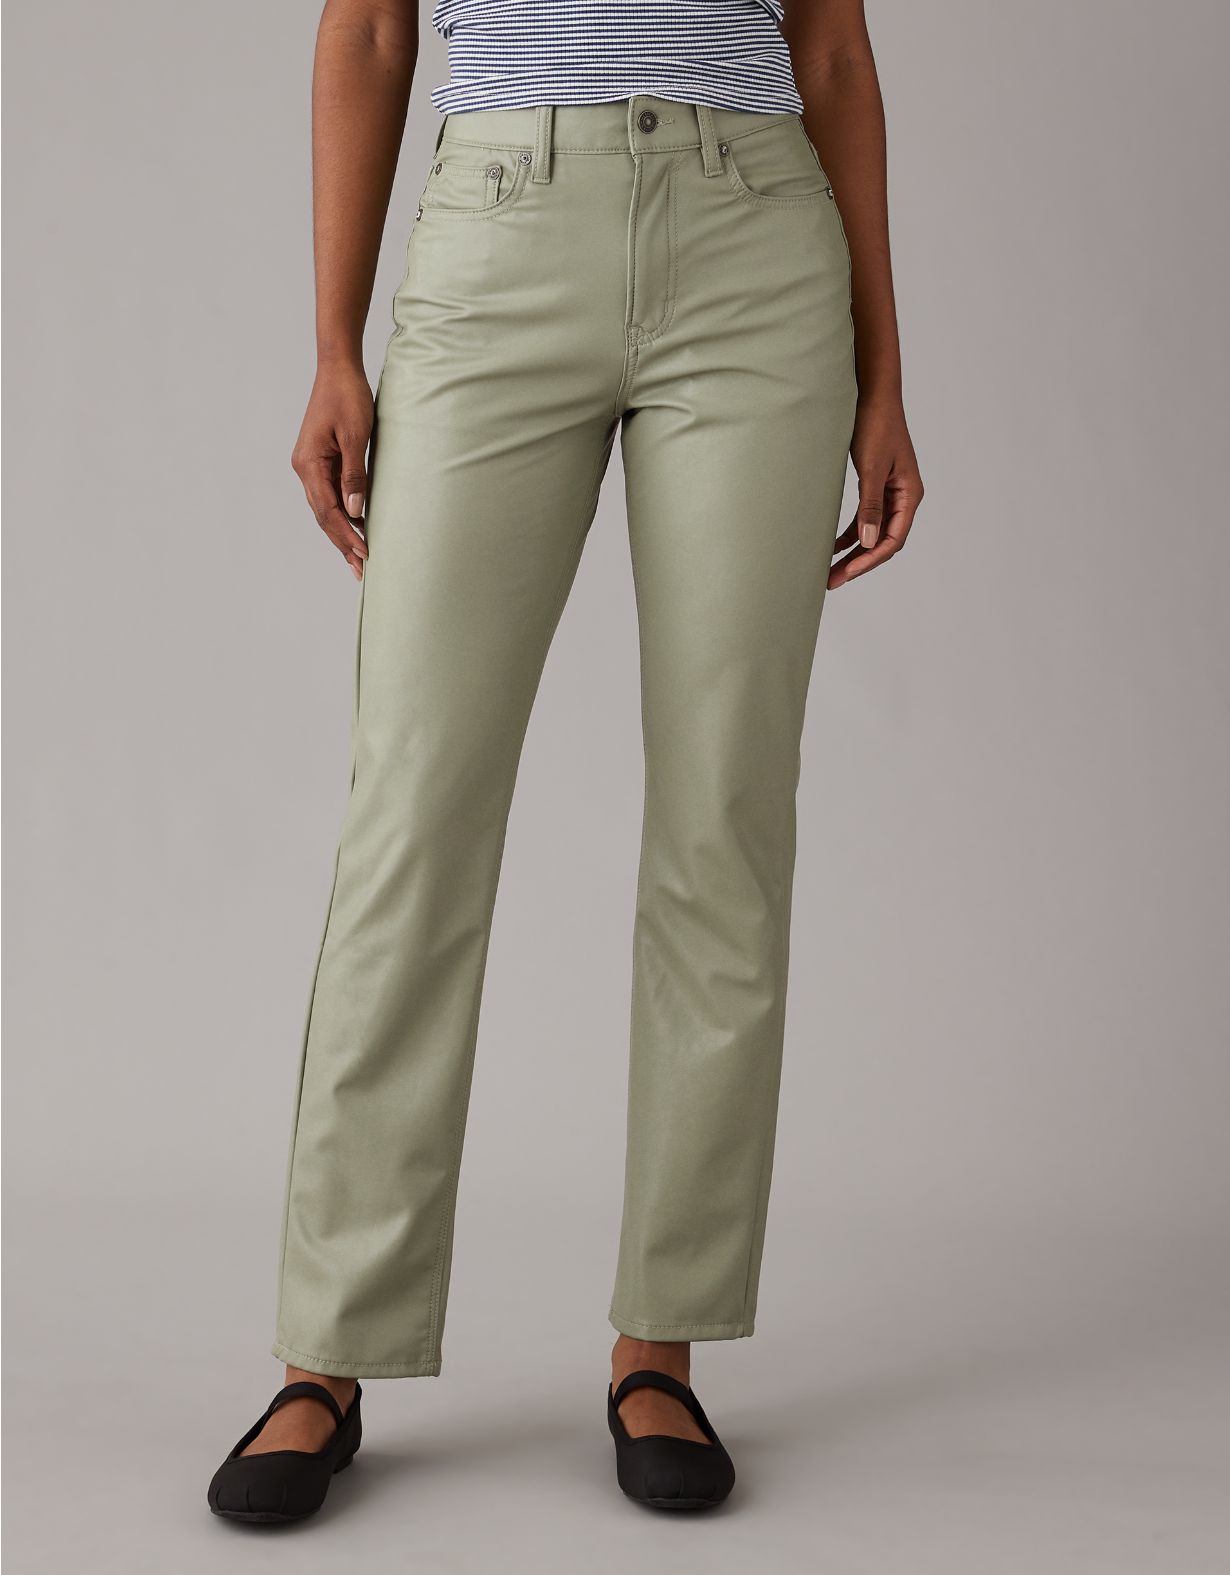 AE Stretch Vegan Leather Super High-Waisted Straight Pant